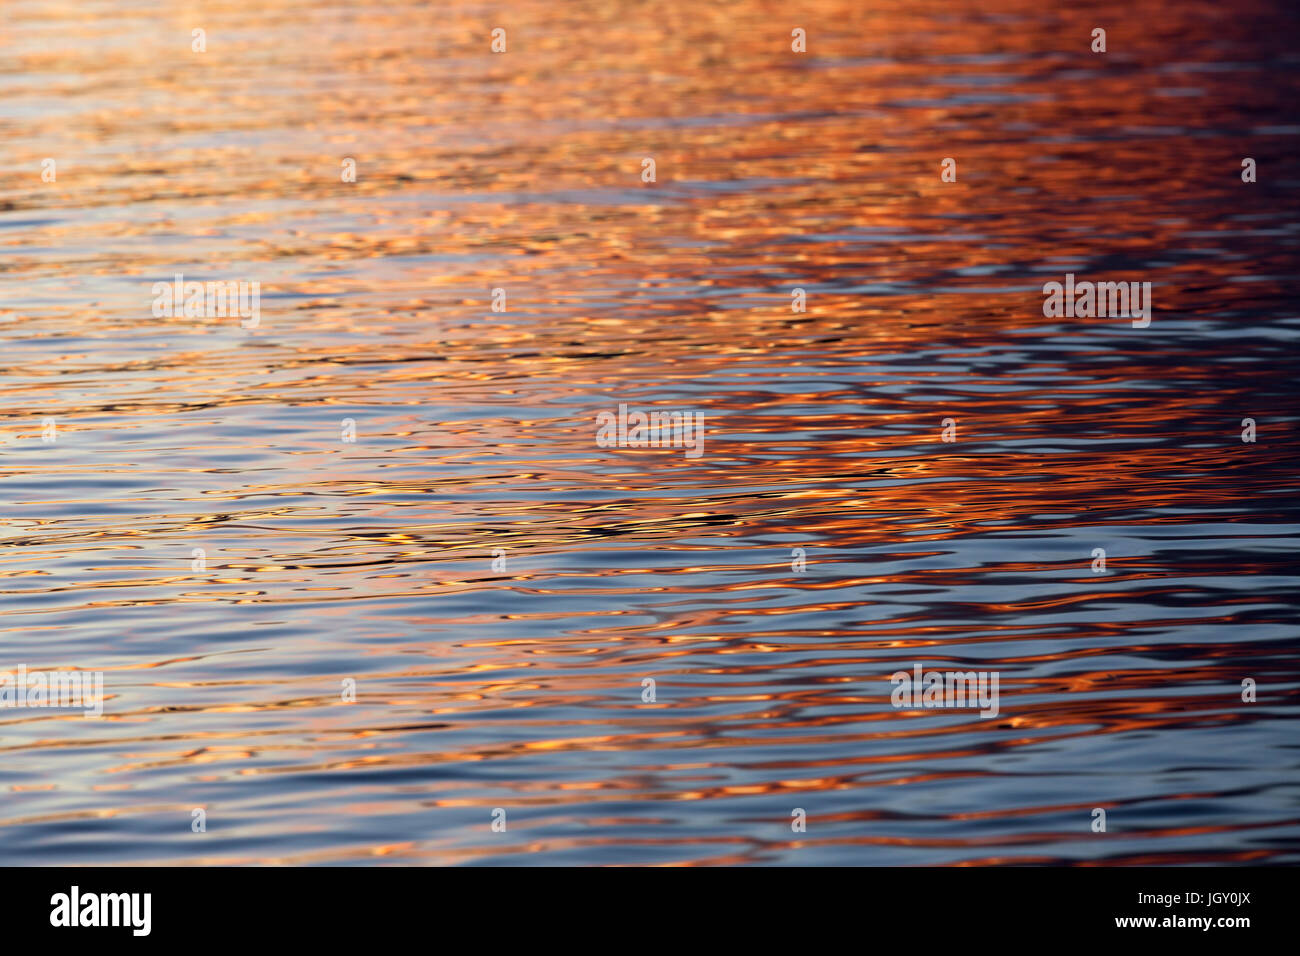 Beautiful red and orange sunset reflections on a calm bay of water. Stock Photo